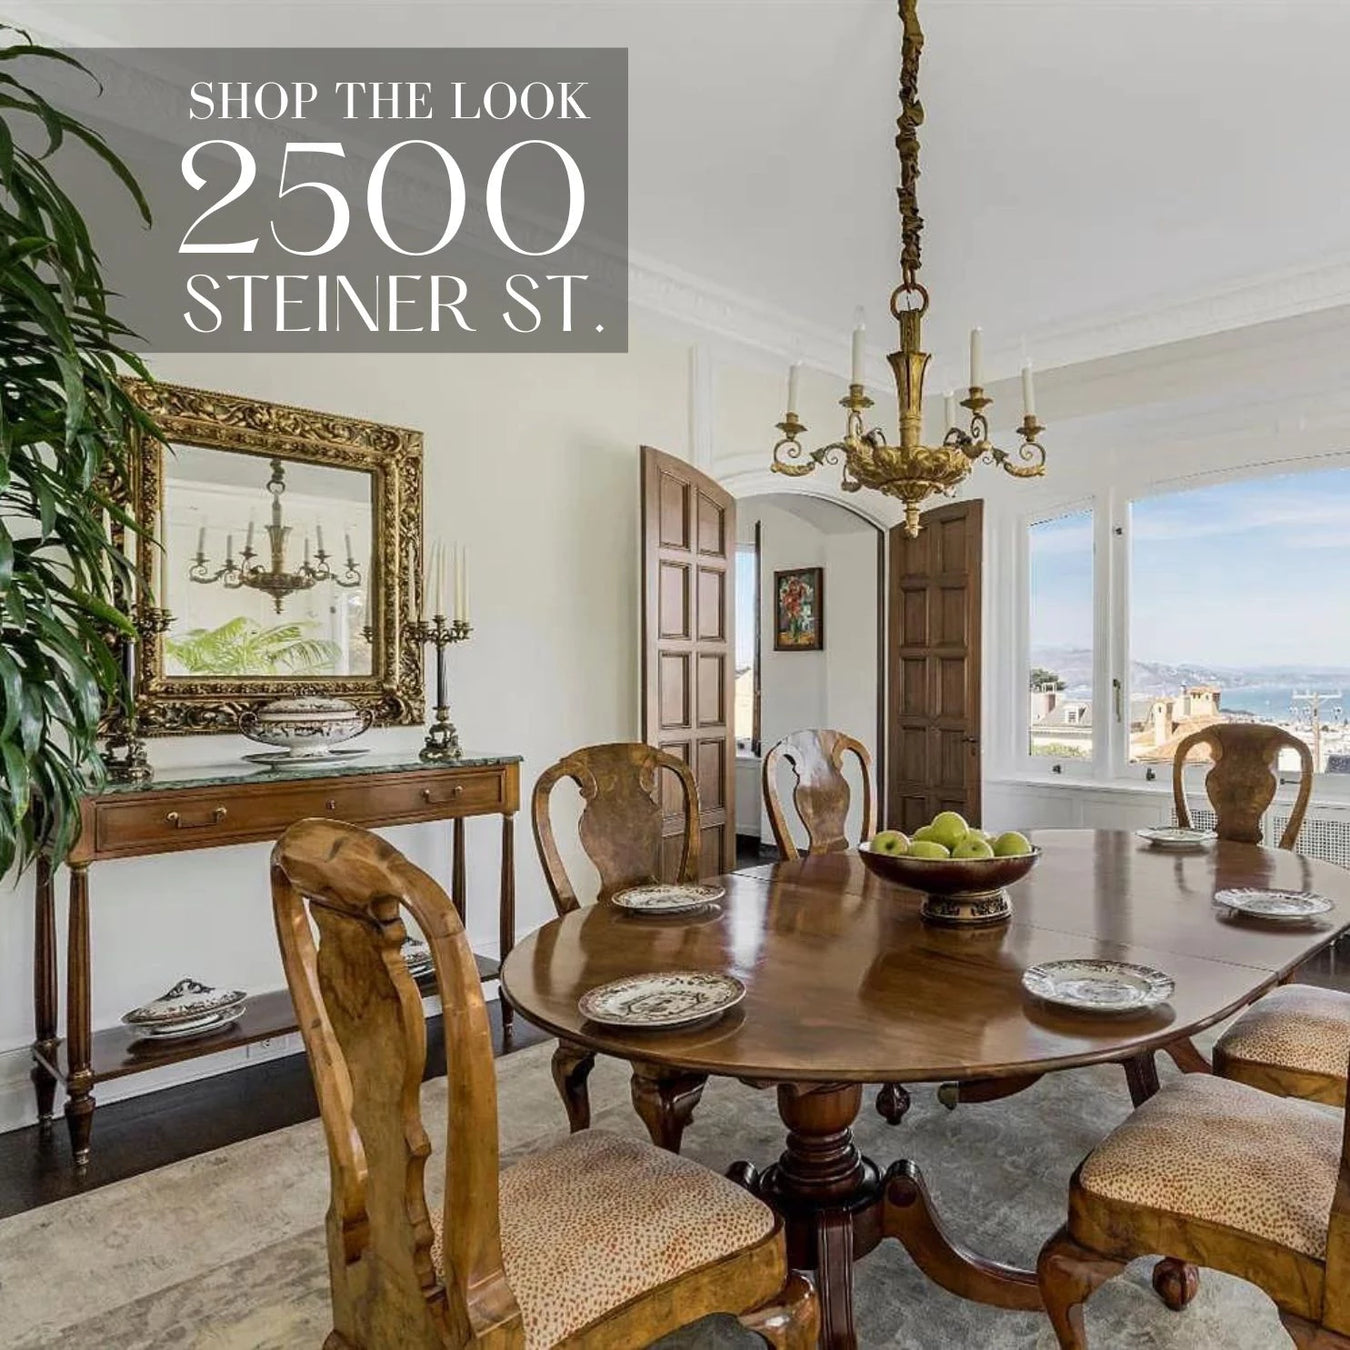 SHOP THE LOOK: THE DINING ROOM AT 2500 STEINER ST.